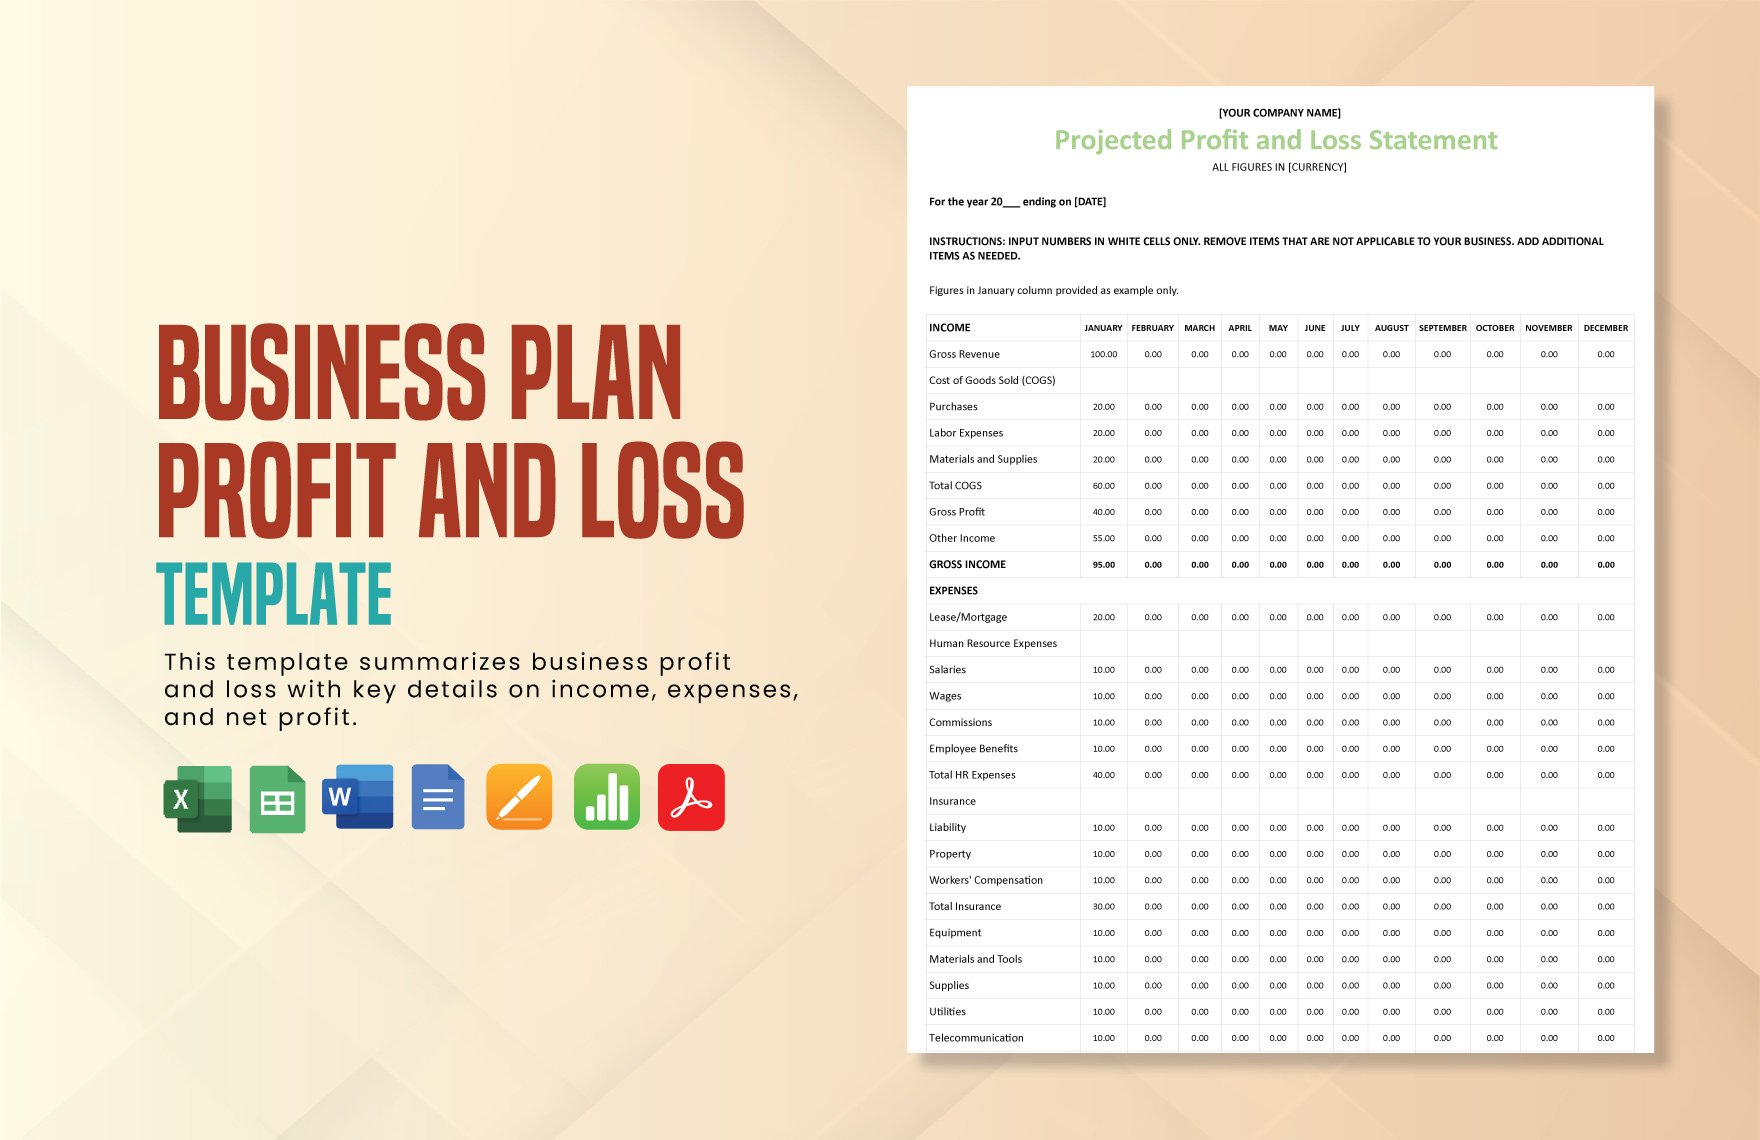 Business Plan Profit And Loss Template